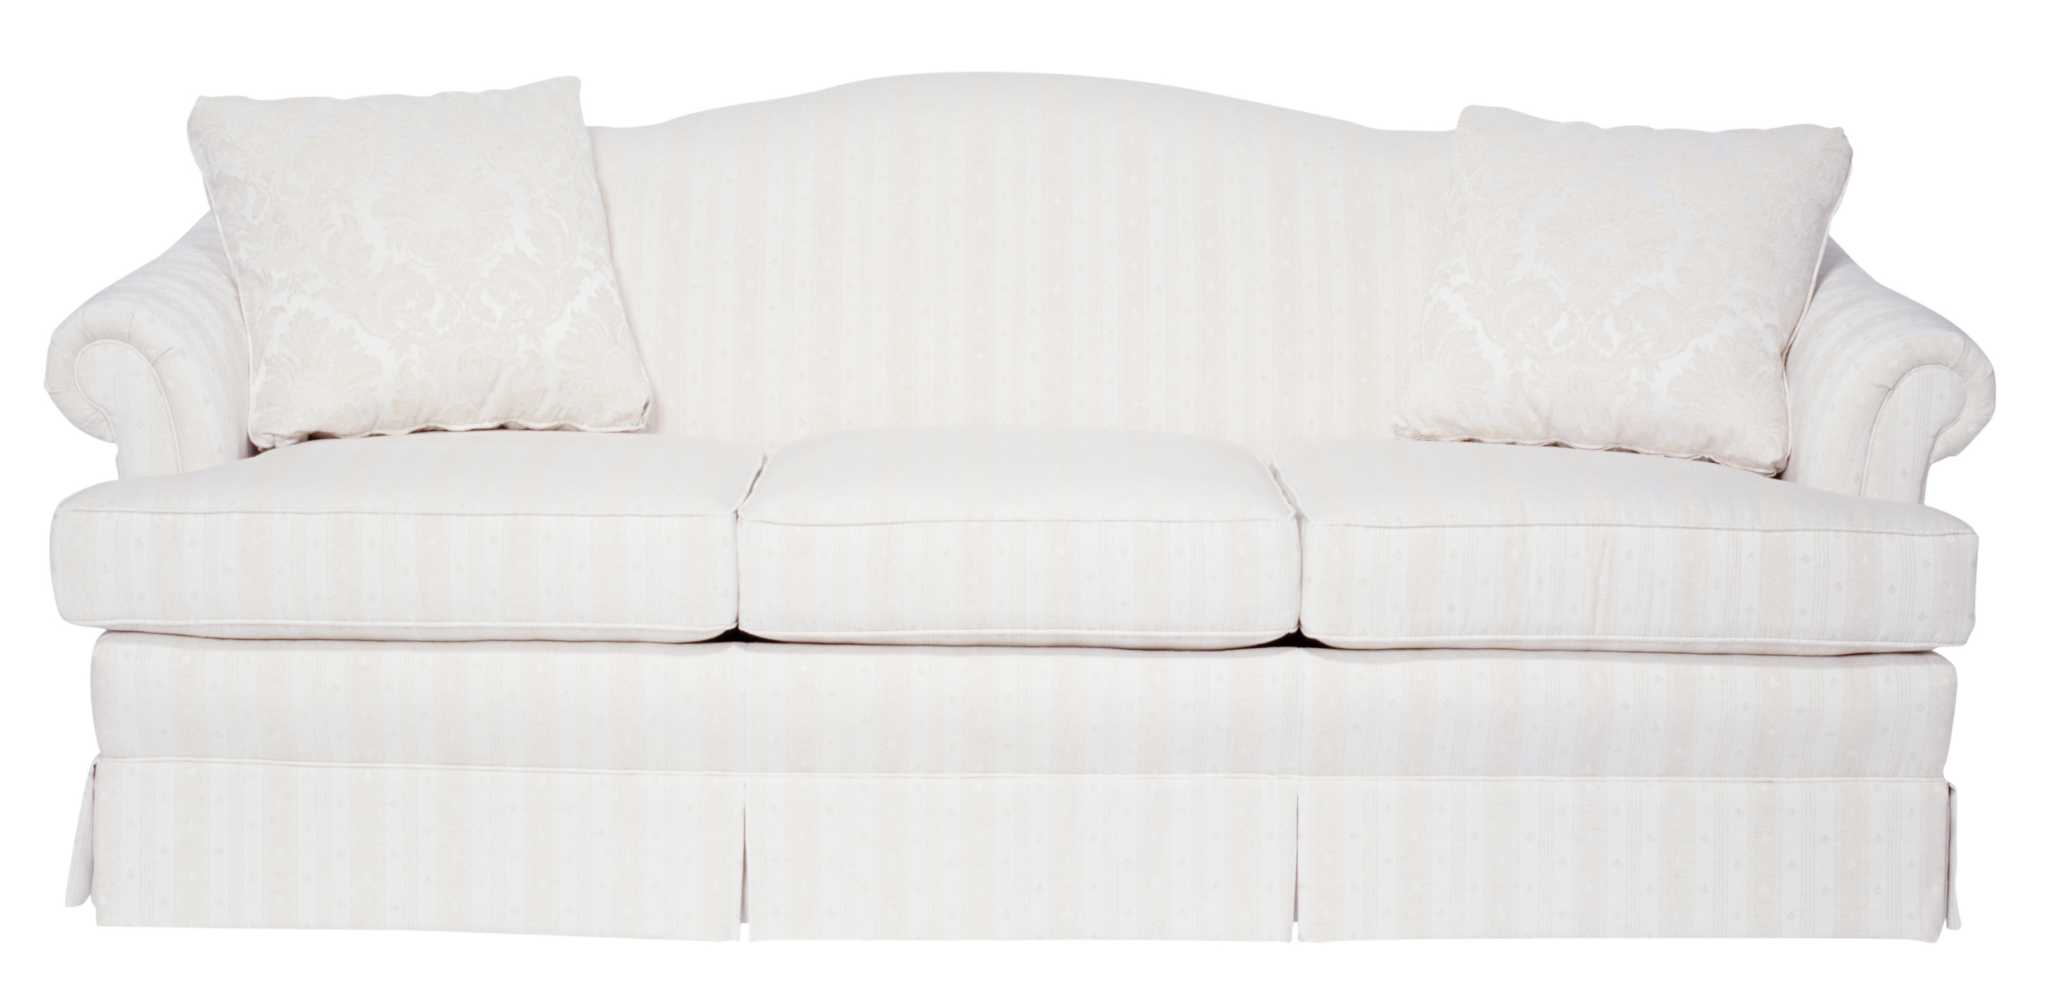 How To Care For Down-Stuffed Upholstery